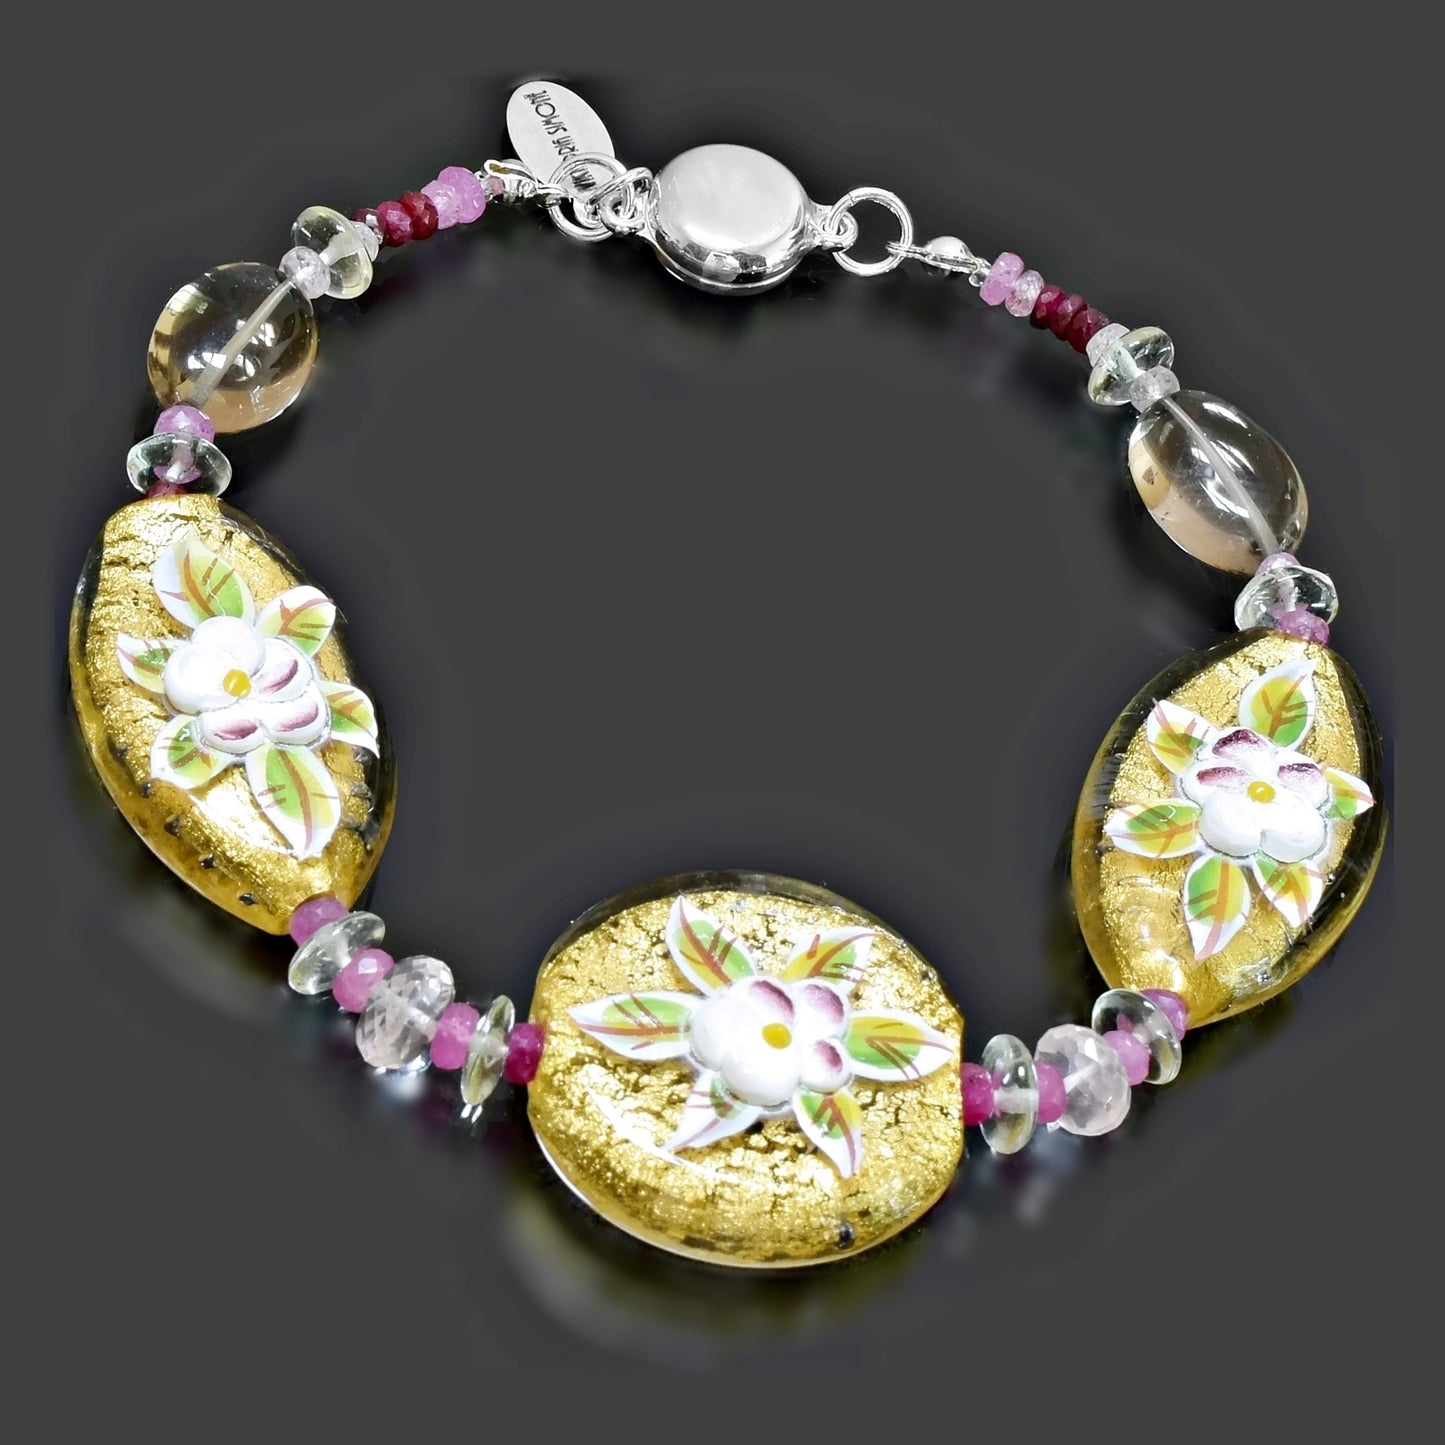 Gold Floral Beaded Bracelet with Green Amethyst, Tourmaline & Canary Quartz 6" Clasp